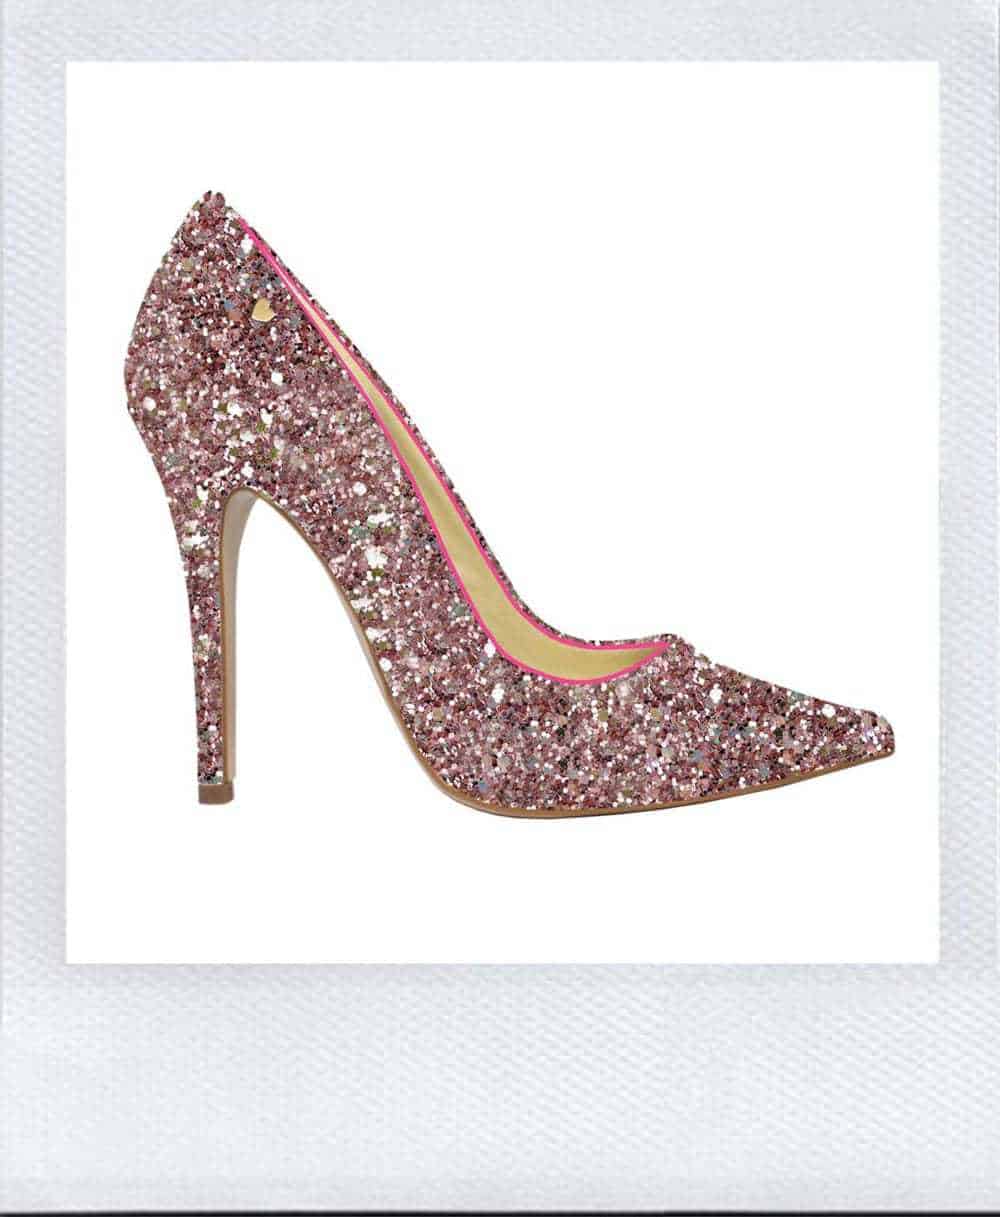 Glittery pink stiletto heels from MInk Shoes